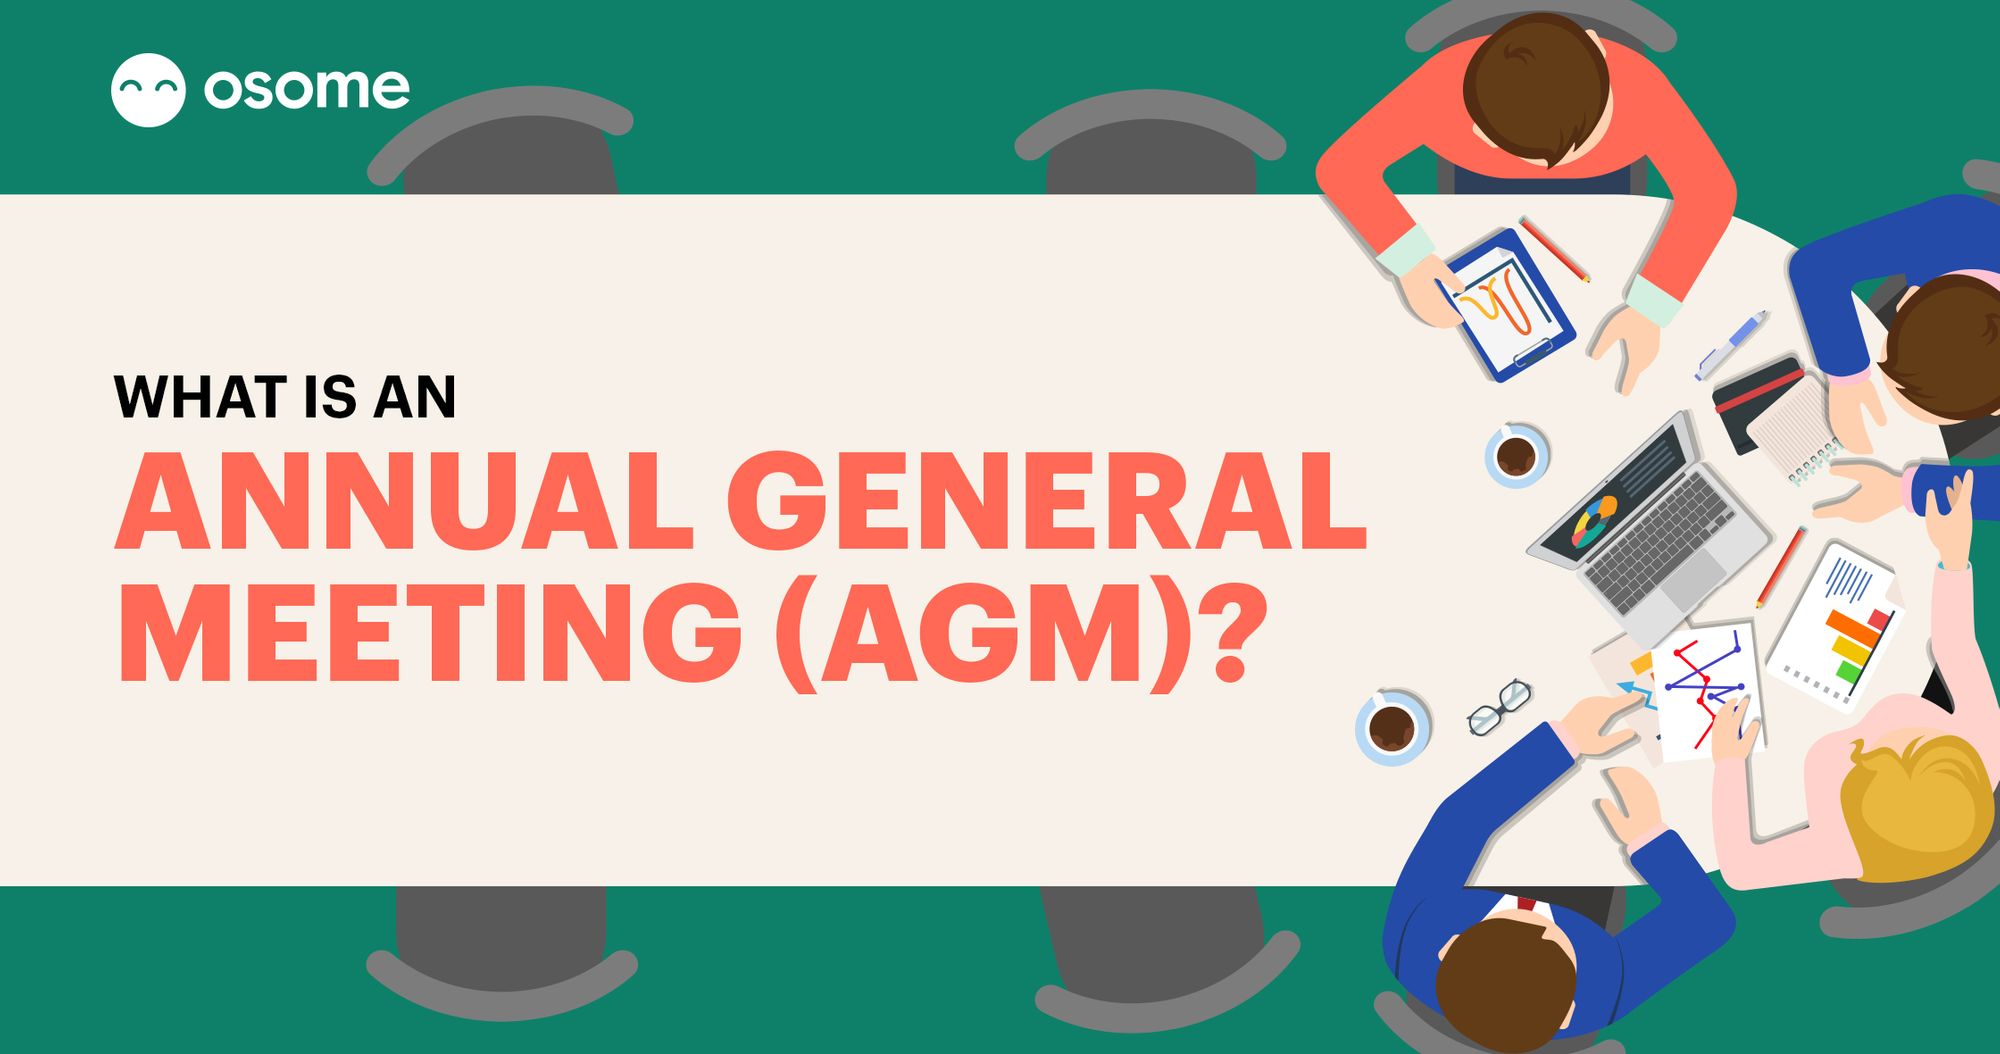 What Is an Annual General Meeting (AGM)